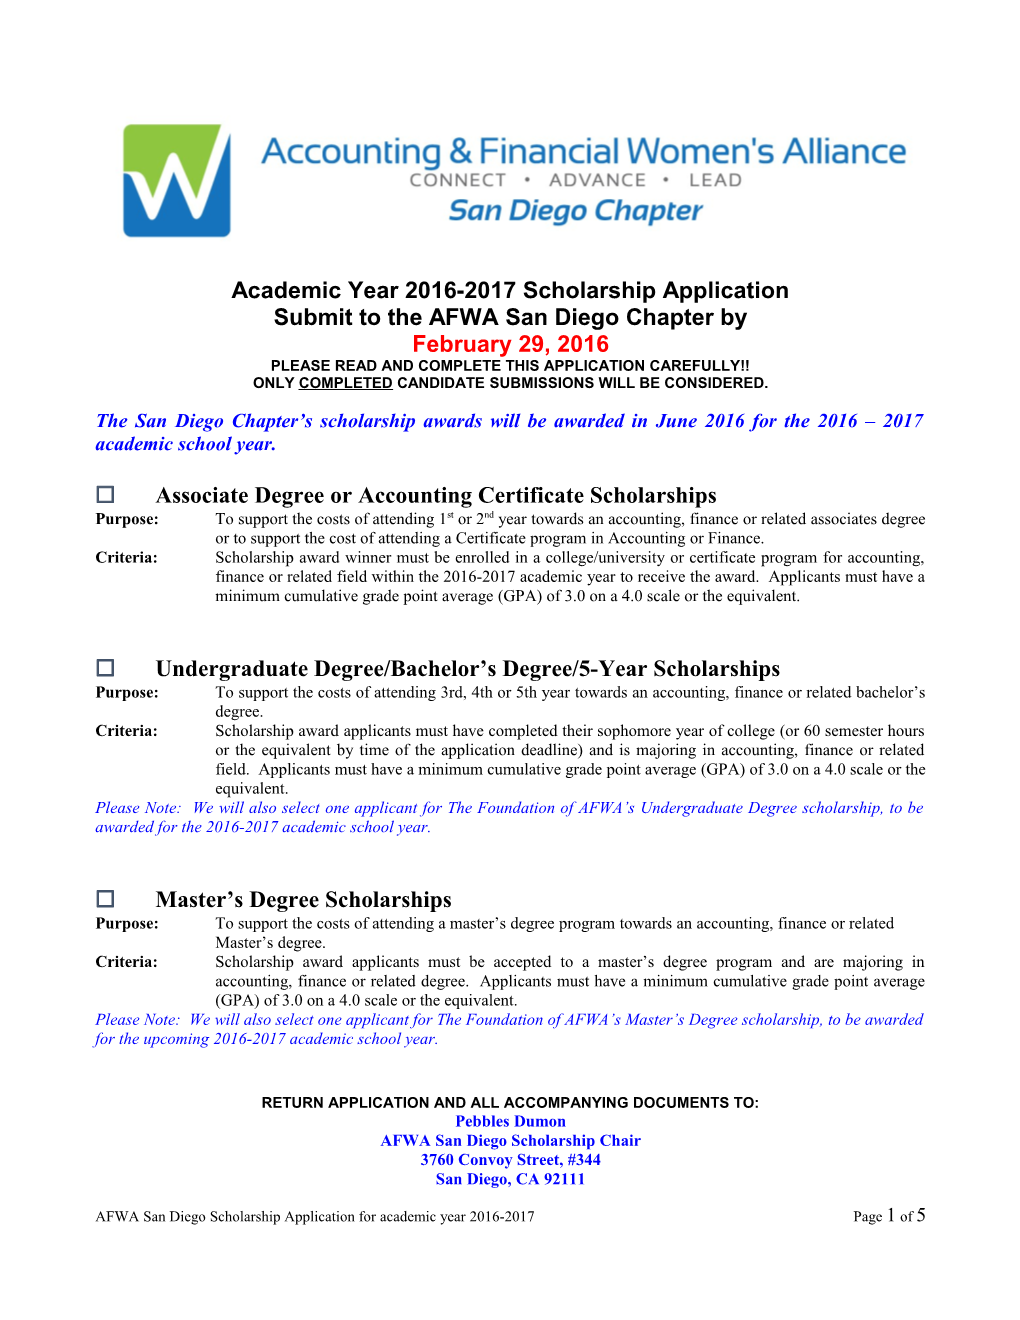 AFWA San Diego Scholarship Application for Academic Year 2016-2017